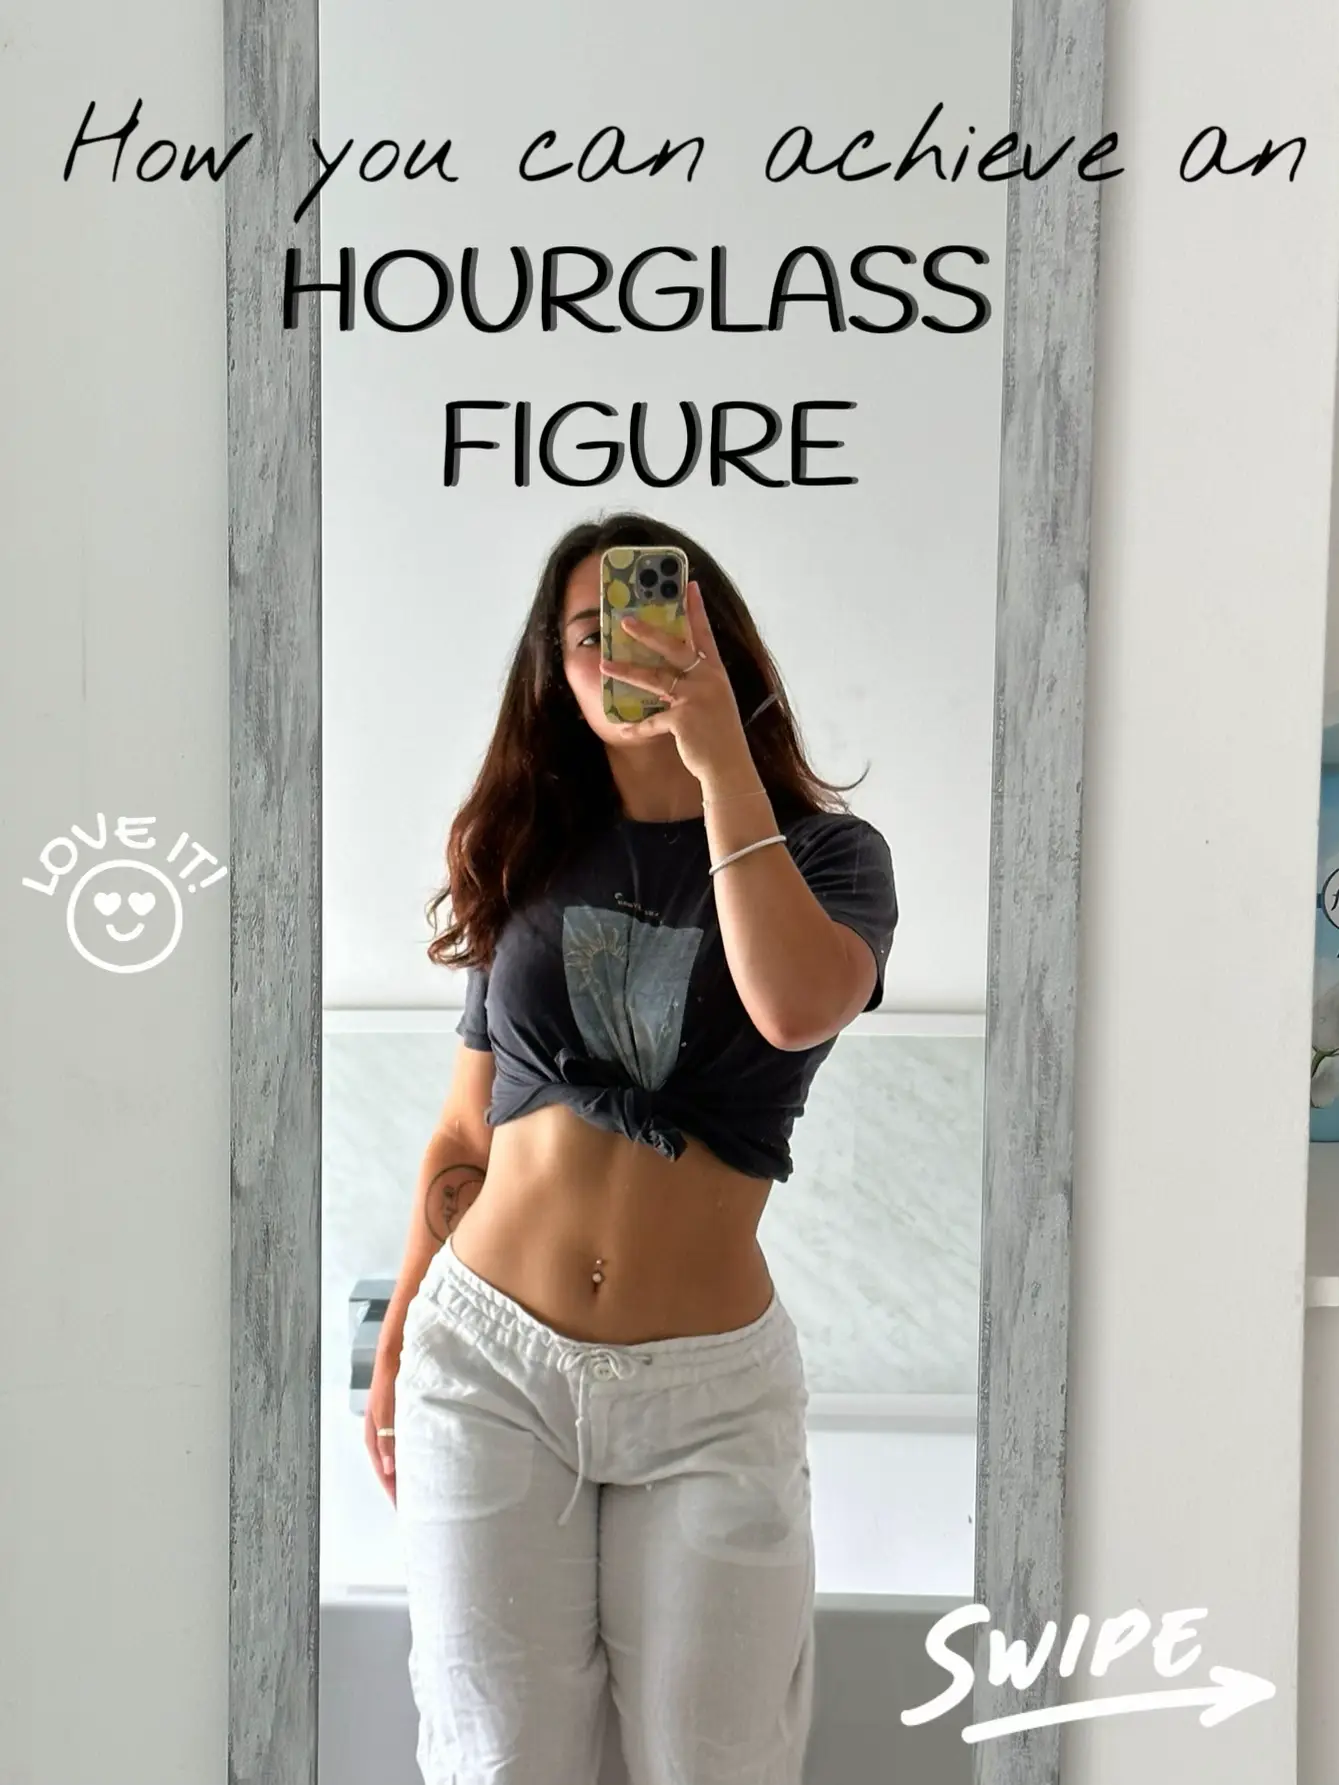 Slim Waist, Sexy Hips: Your Guide to Building an Hourglass Figure